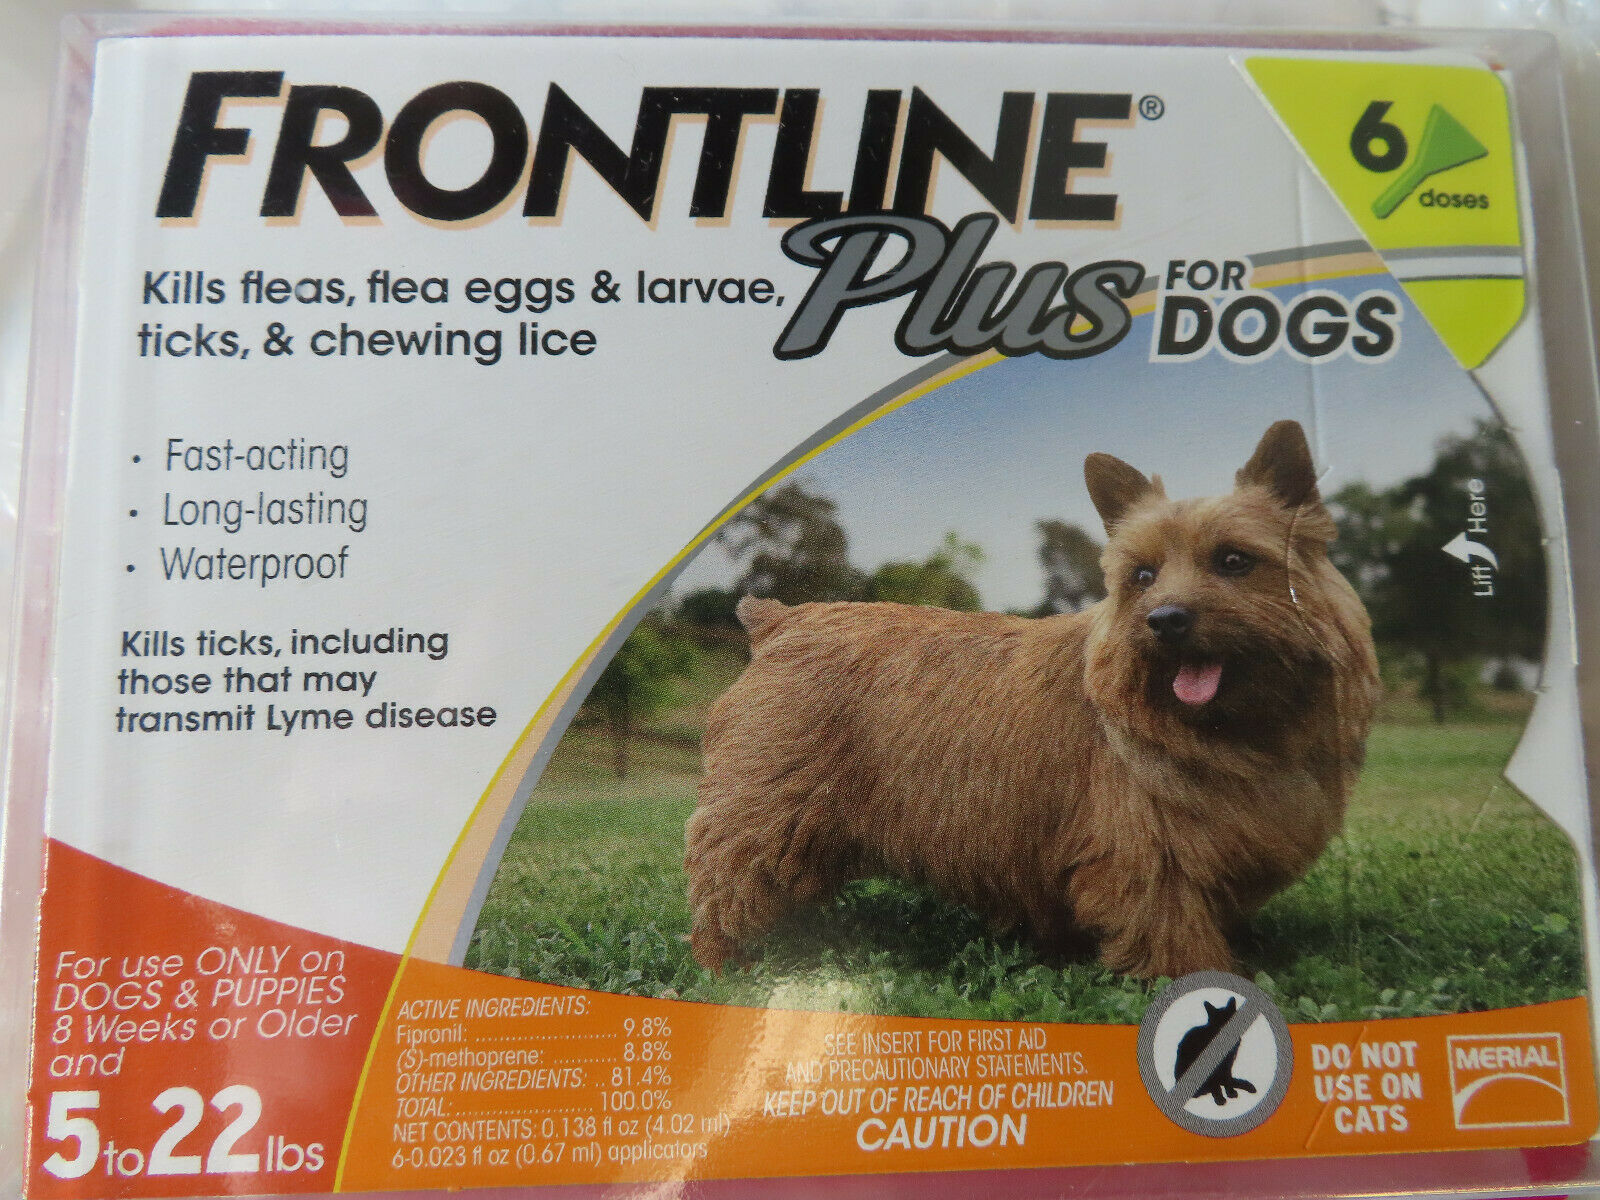 Frontline Plus Dogs 5-22lbs Flea & Tick Control 6 Doses New, Sealed